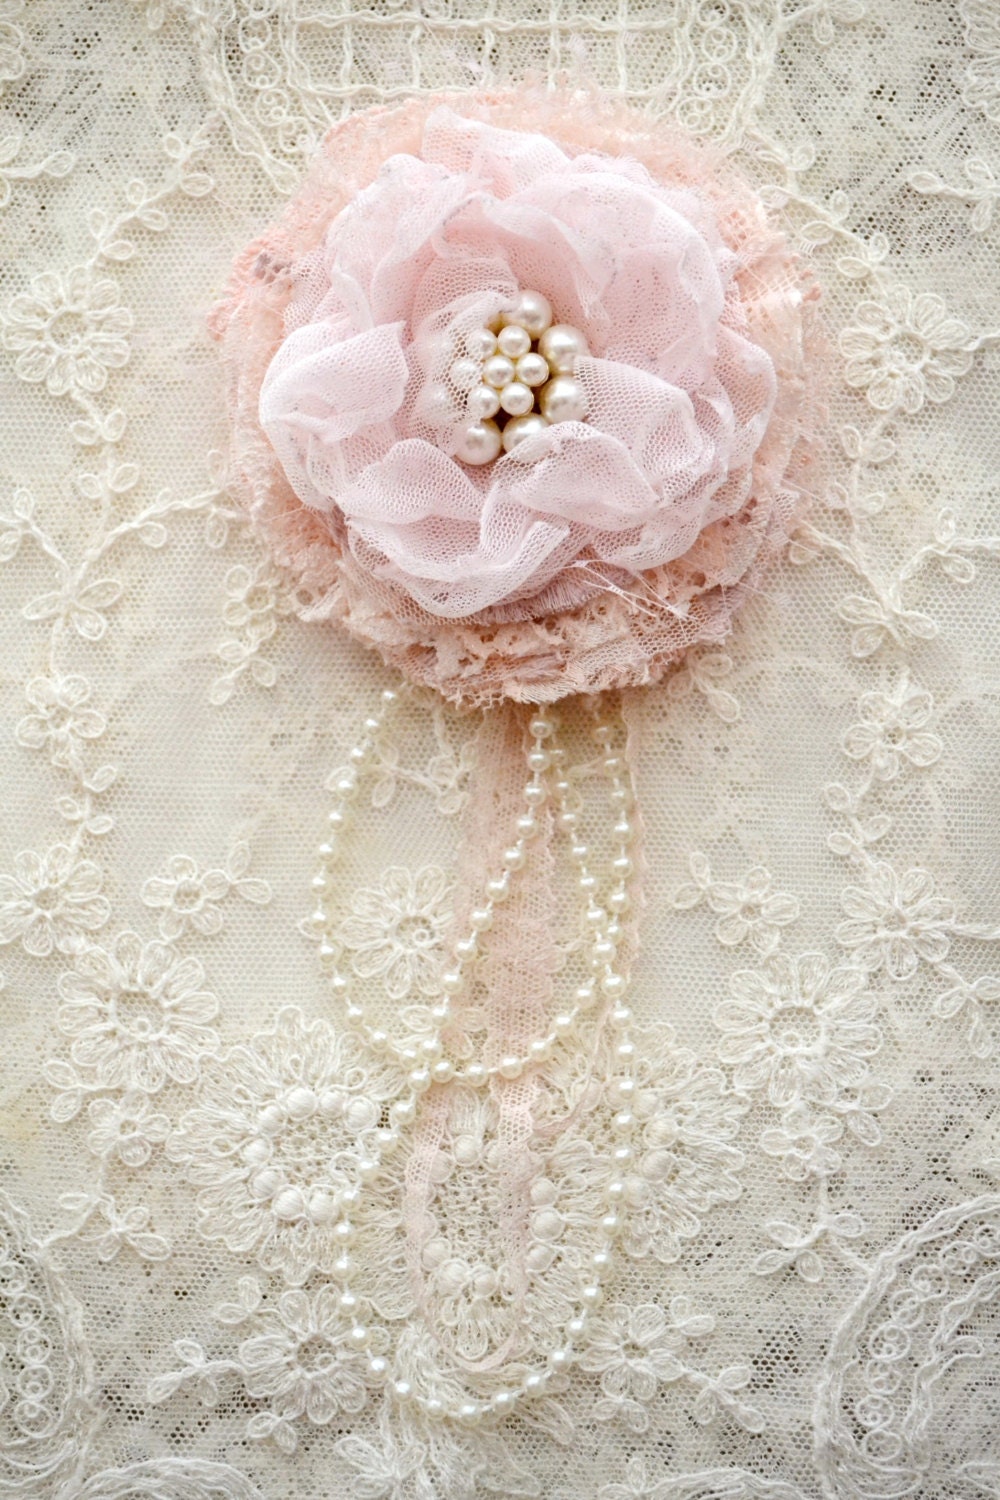 Large PINK Gillyflower - Handmade lace flower